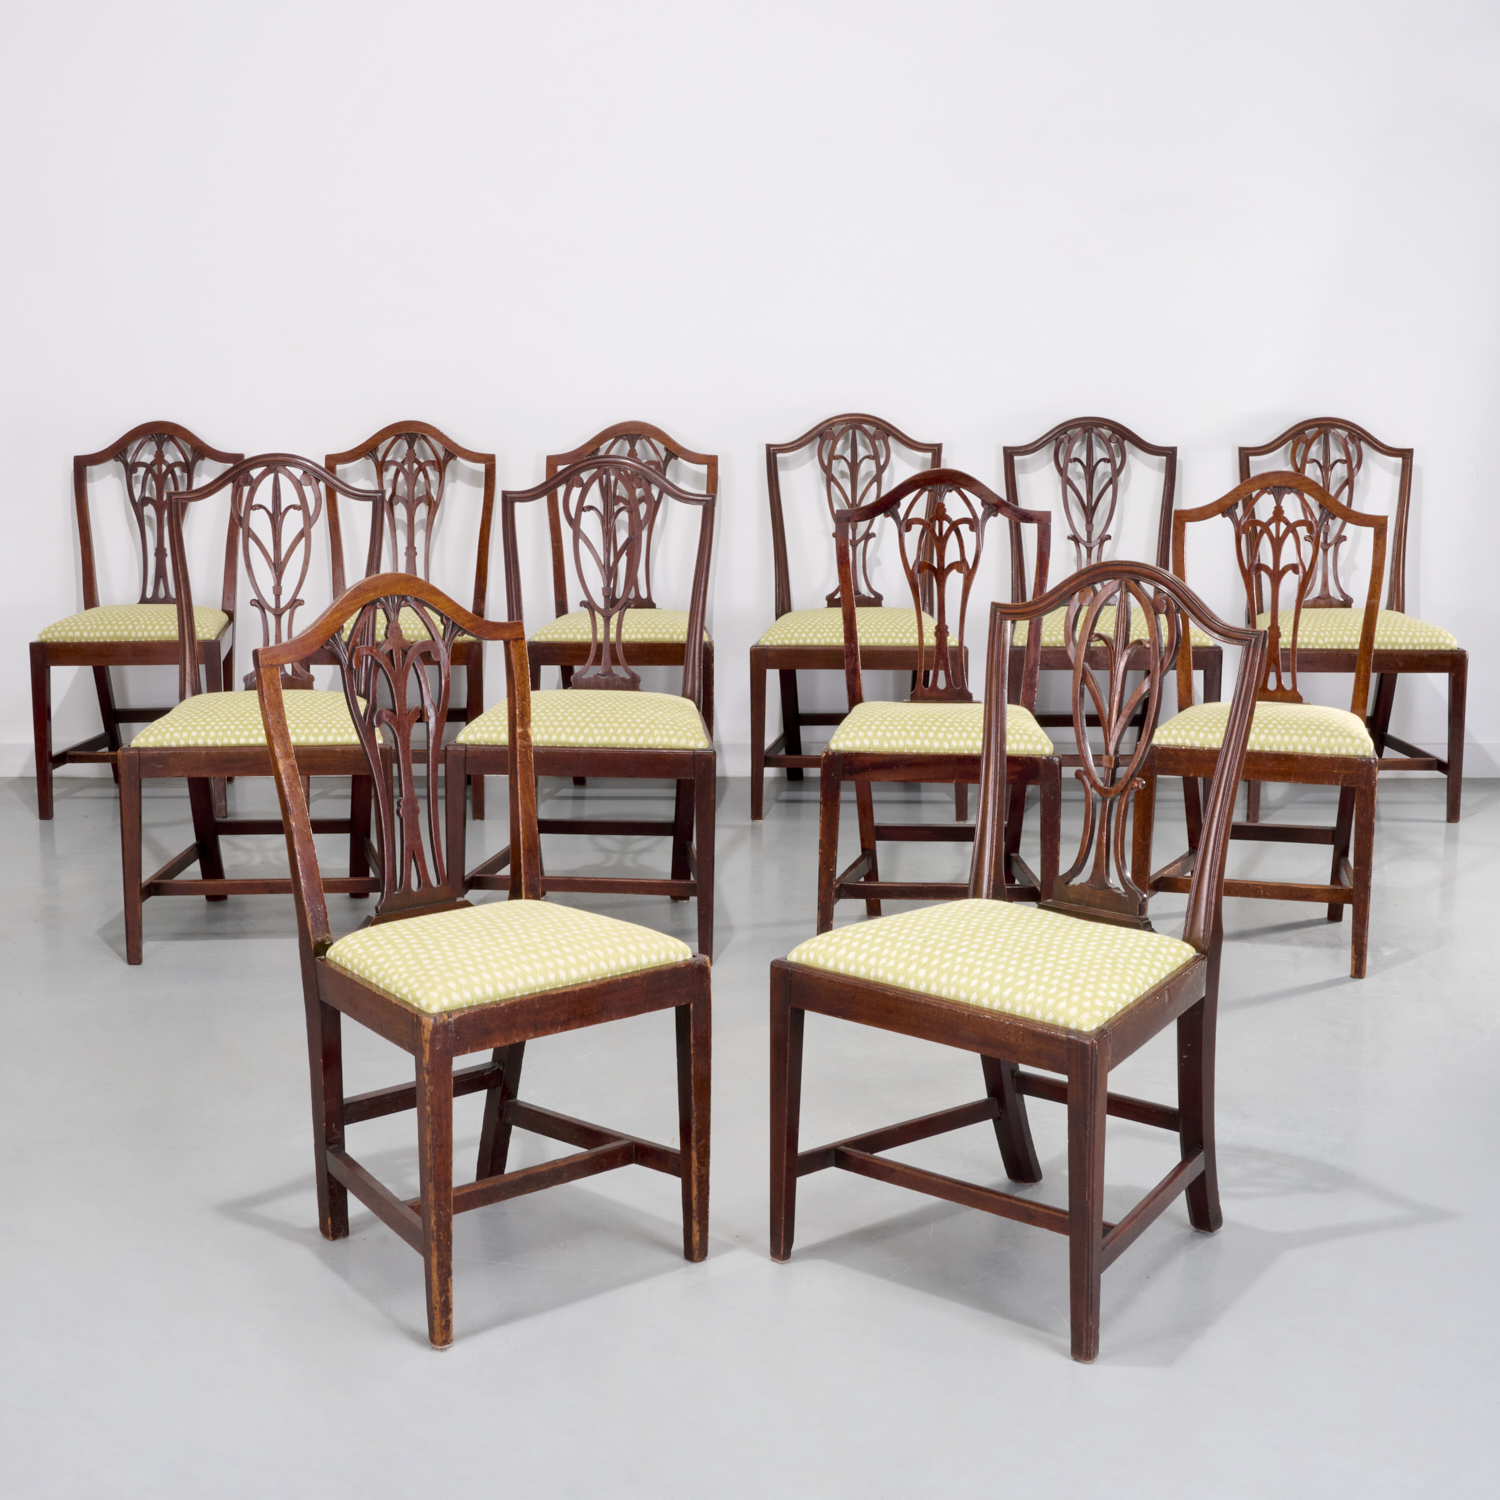  12 DINING CHAIRS SUPPLIED BY 360416